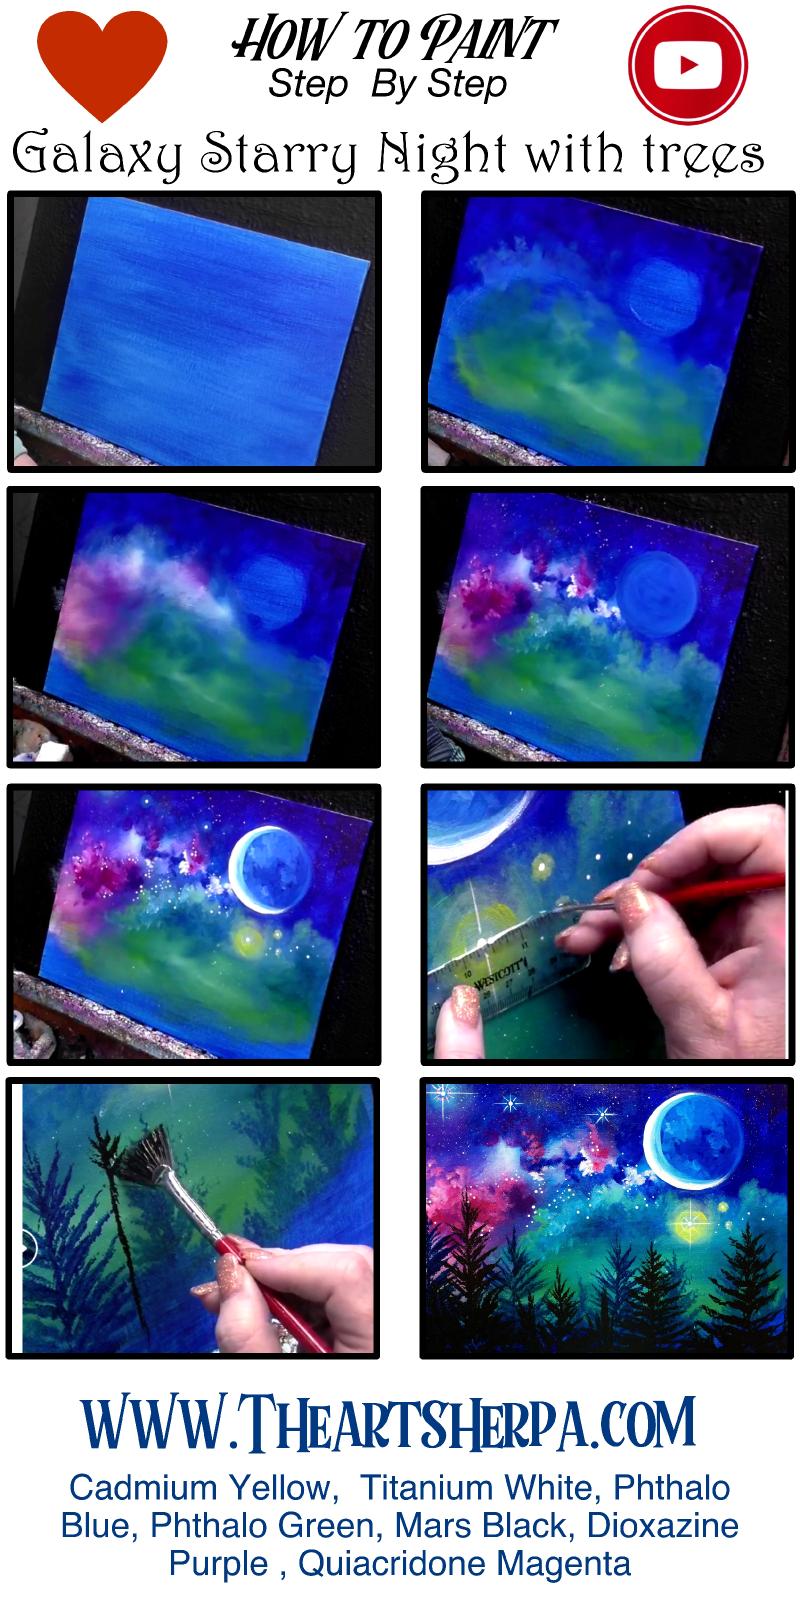 How To Paint A Starry Night Galaxy Over Trees STEP By STEP | The Art Sherpa